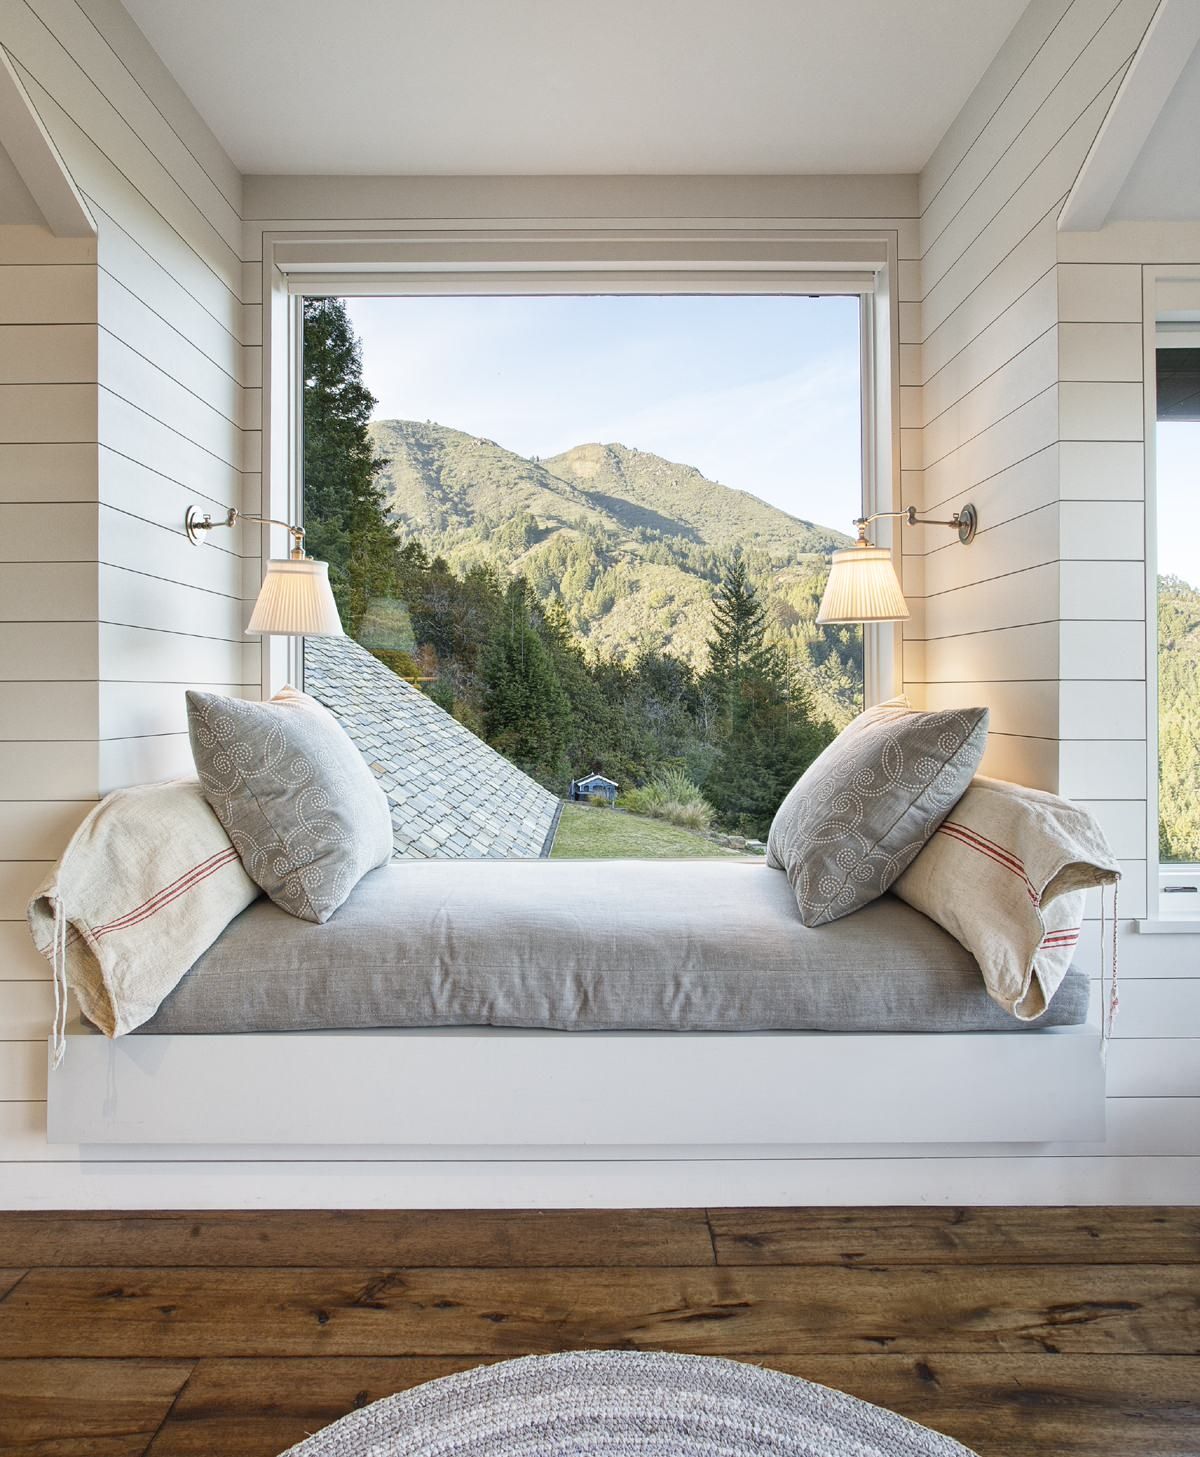 Window seats in the bedroom can offer picturesque views of the landscape outside